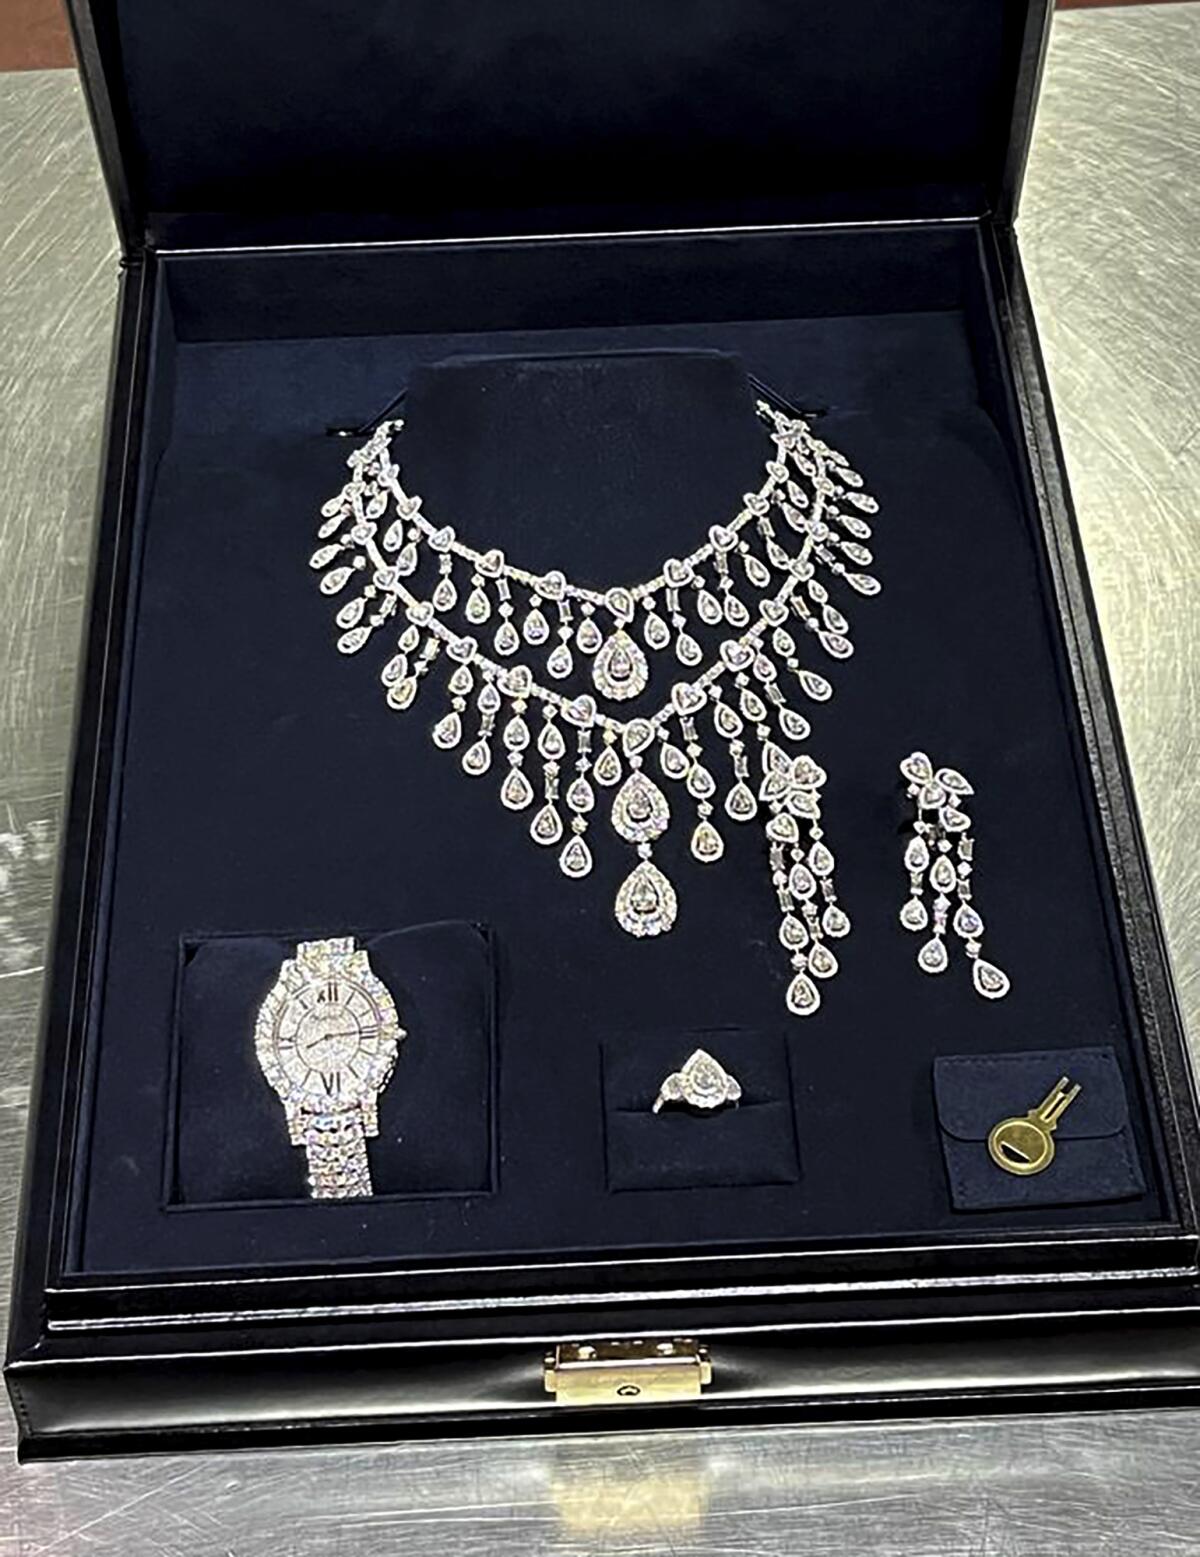 A case holds an ornate diamond necklace, earrings, ring and watch. 